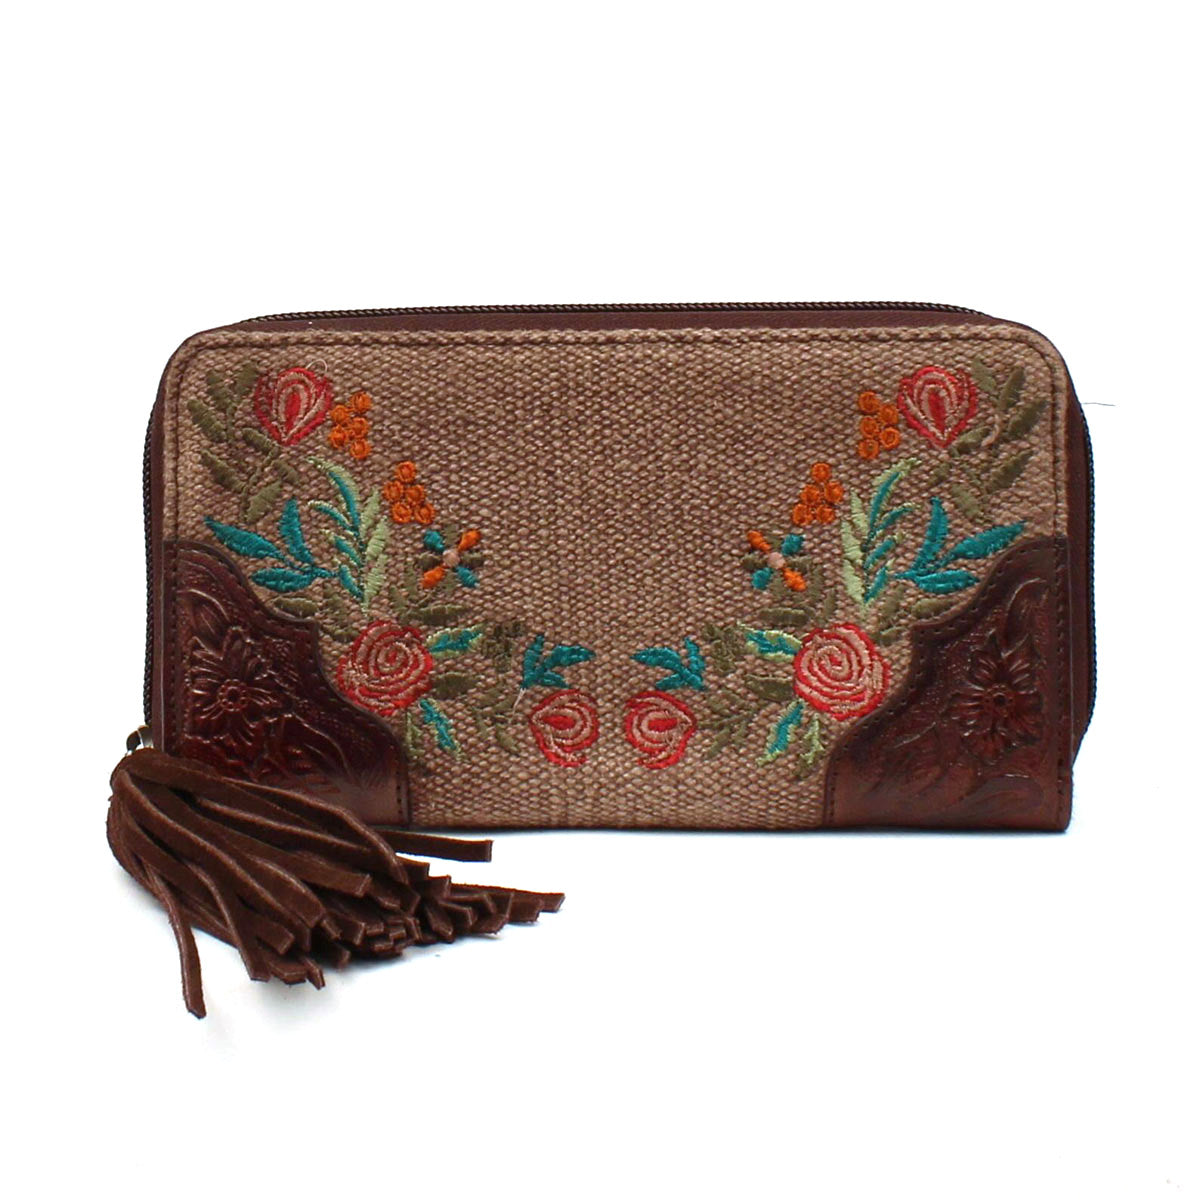 Load image into Gallery viewer, Ariat Audrey Embroidered Clutch
